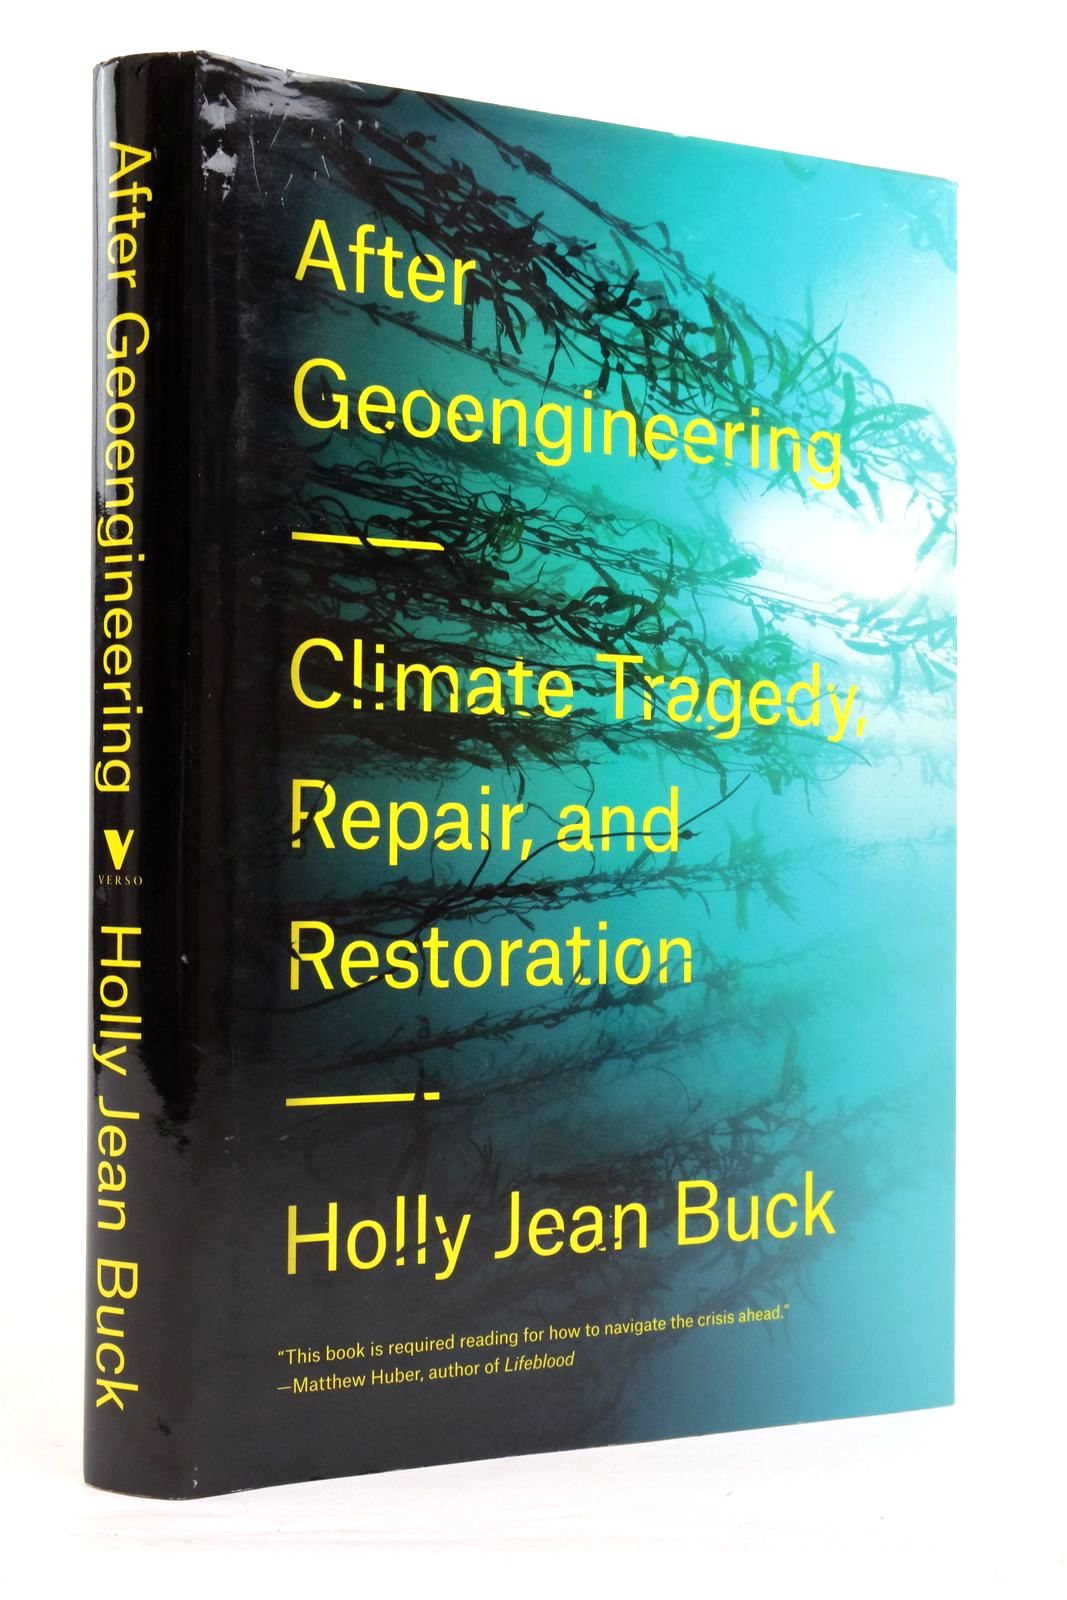 Photo of AFTER GEOENGINEERING: CLIMATE TRAGEDY, REPAIR, AND RESTORATION written by Buck, Holly Jean published by Verso (STOCK CODE: 2137788)  for sale by Stella & Rose's Books